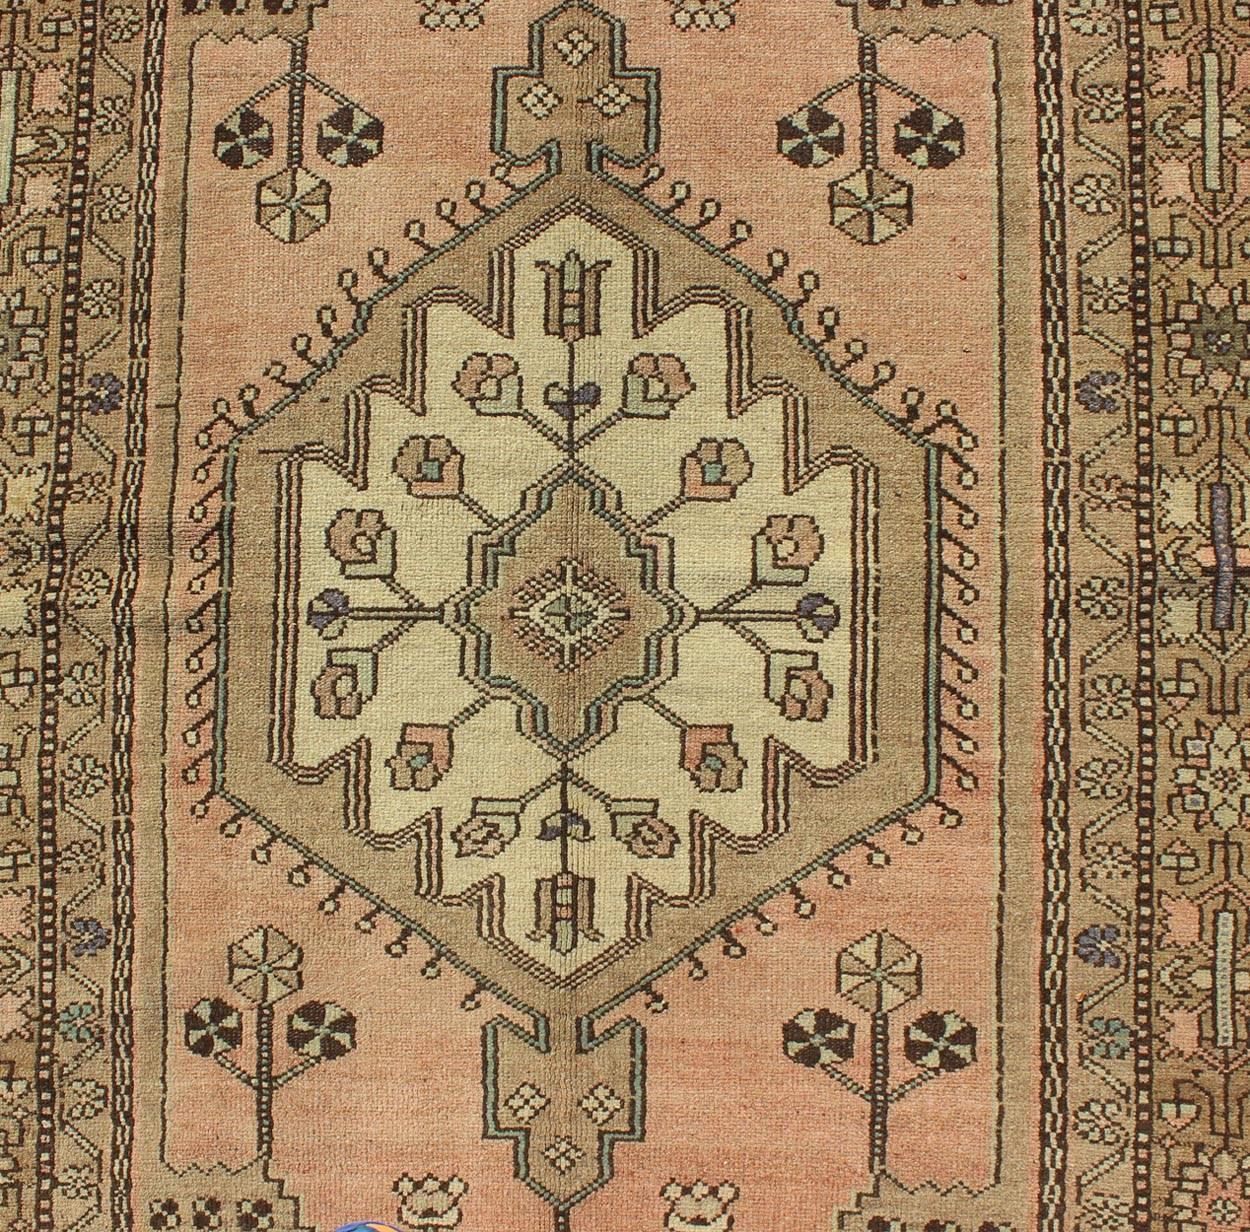 Peach Colored Floral Vintage Turkish Oushak Rug with Multiple Ornate Borders In Excellent Condition For Sale In Atlanta, GA